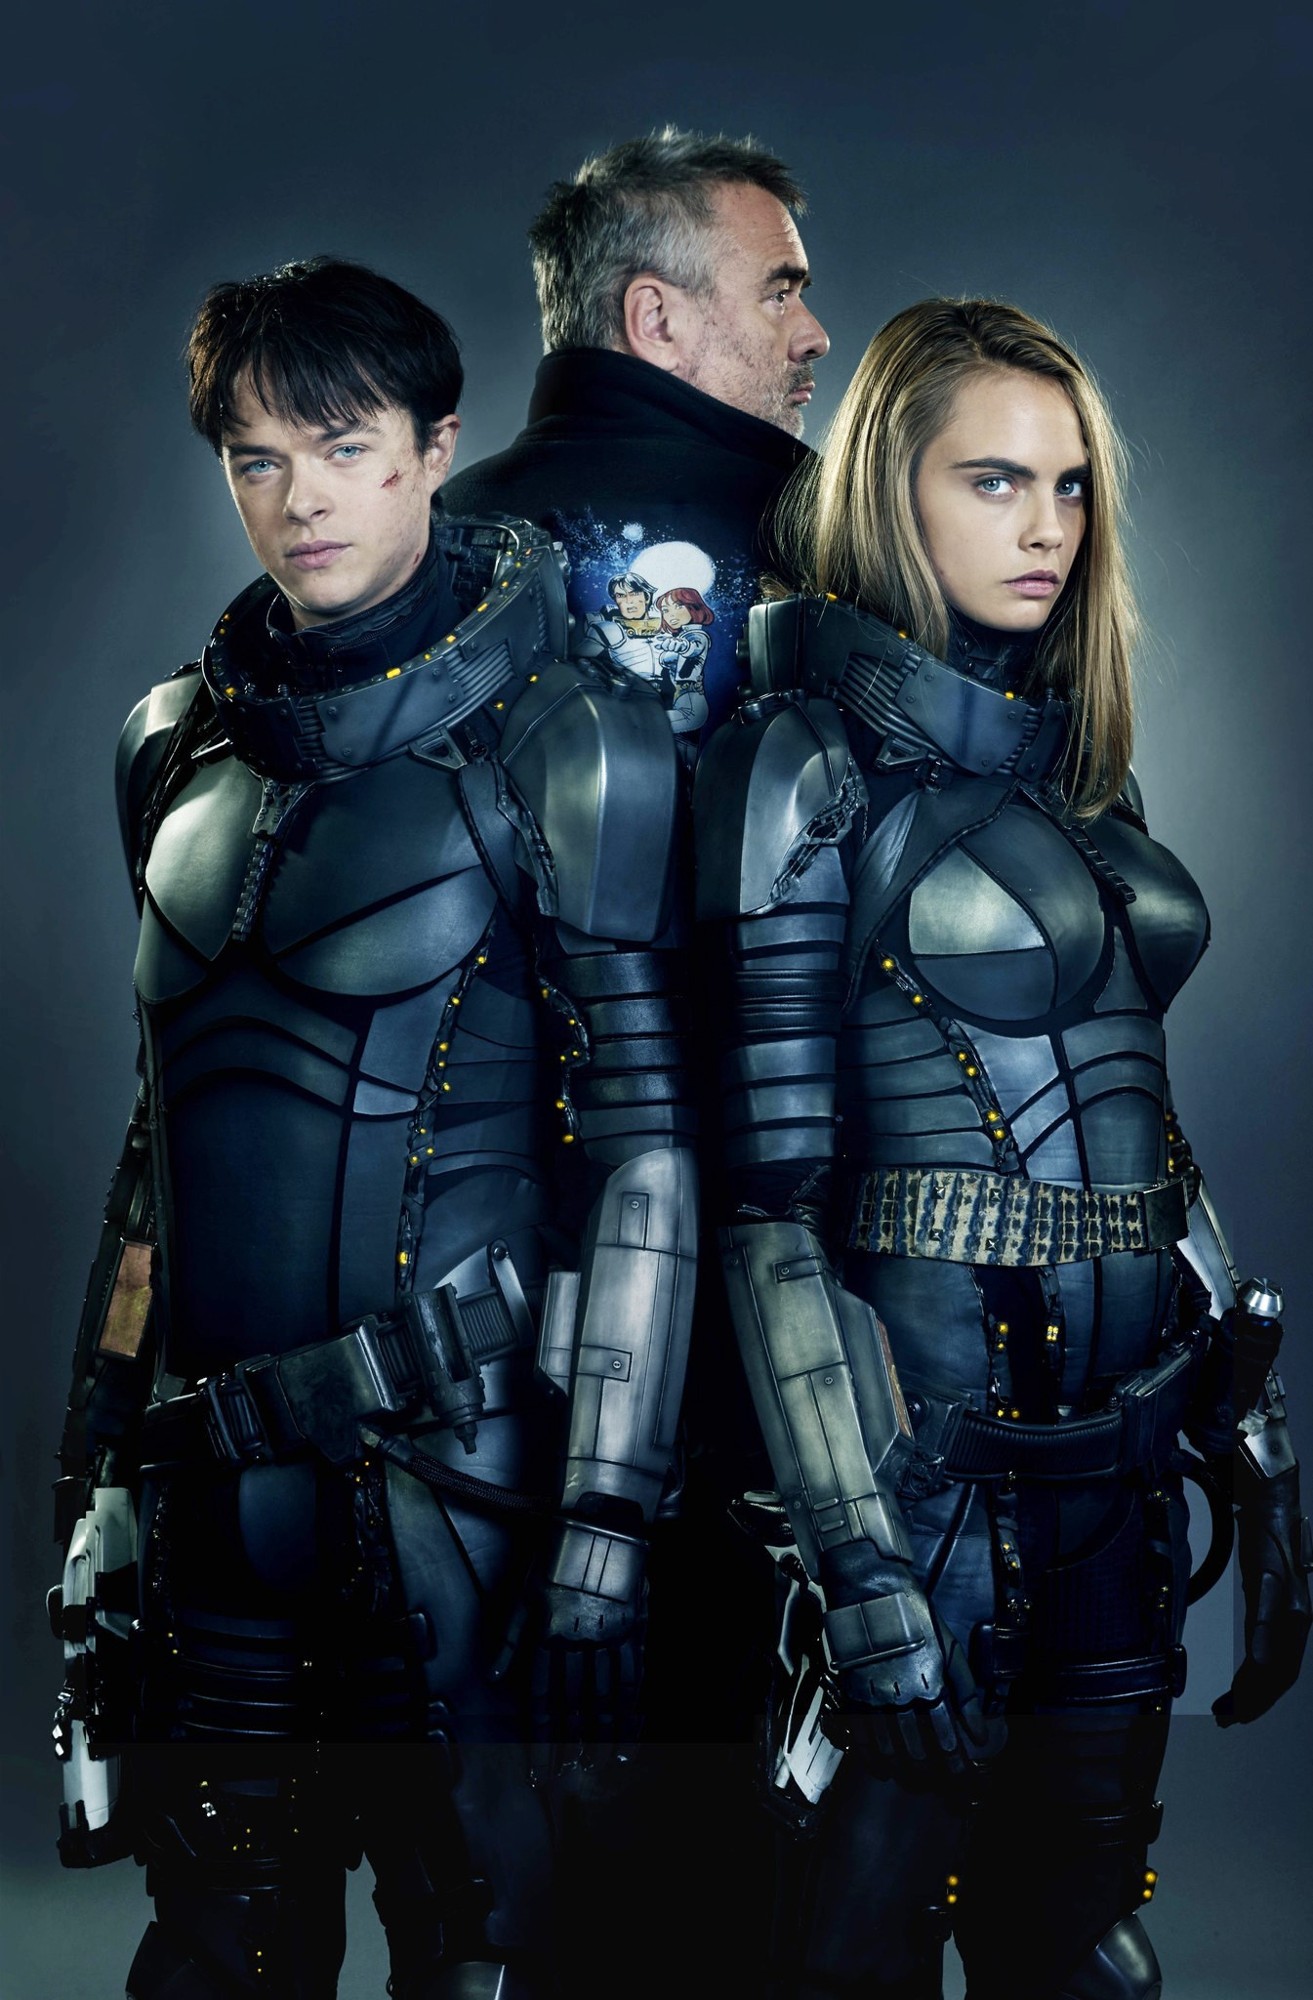 Dane DeHaan, Luc Besson and Cara Delevingne in STX Entertainment's Valerian and the City of a Thousand Planets (2107)